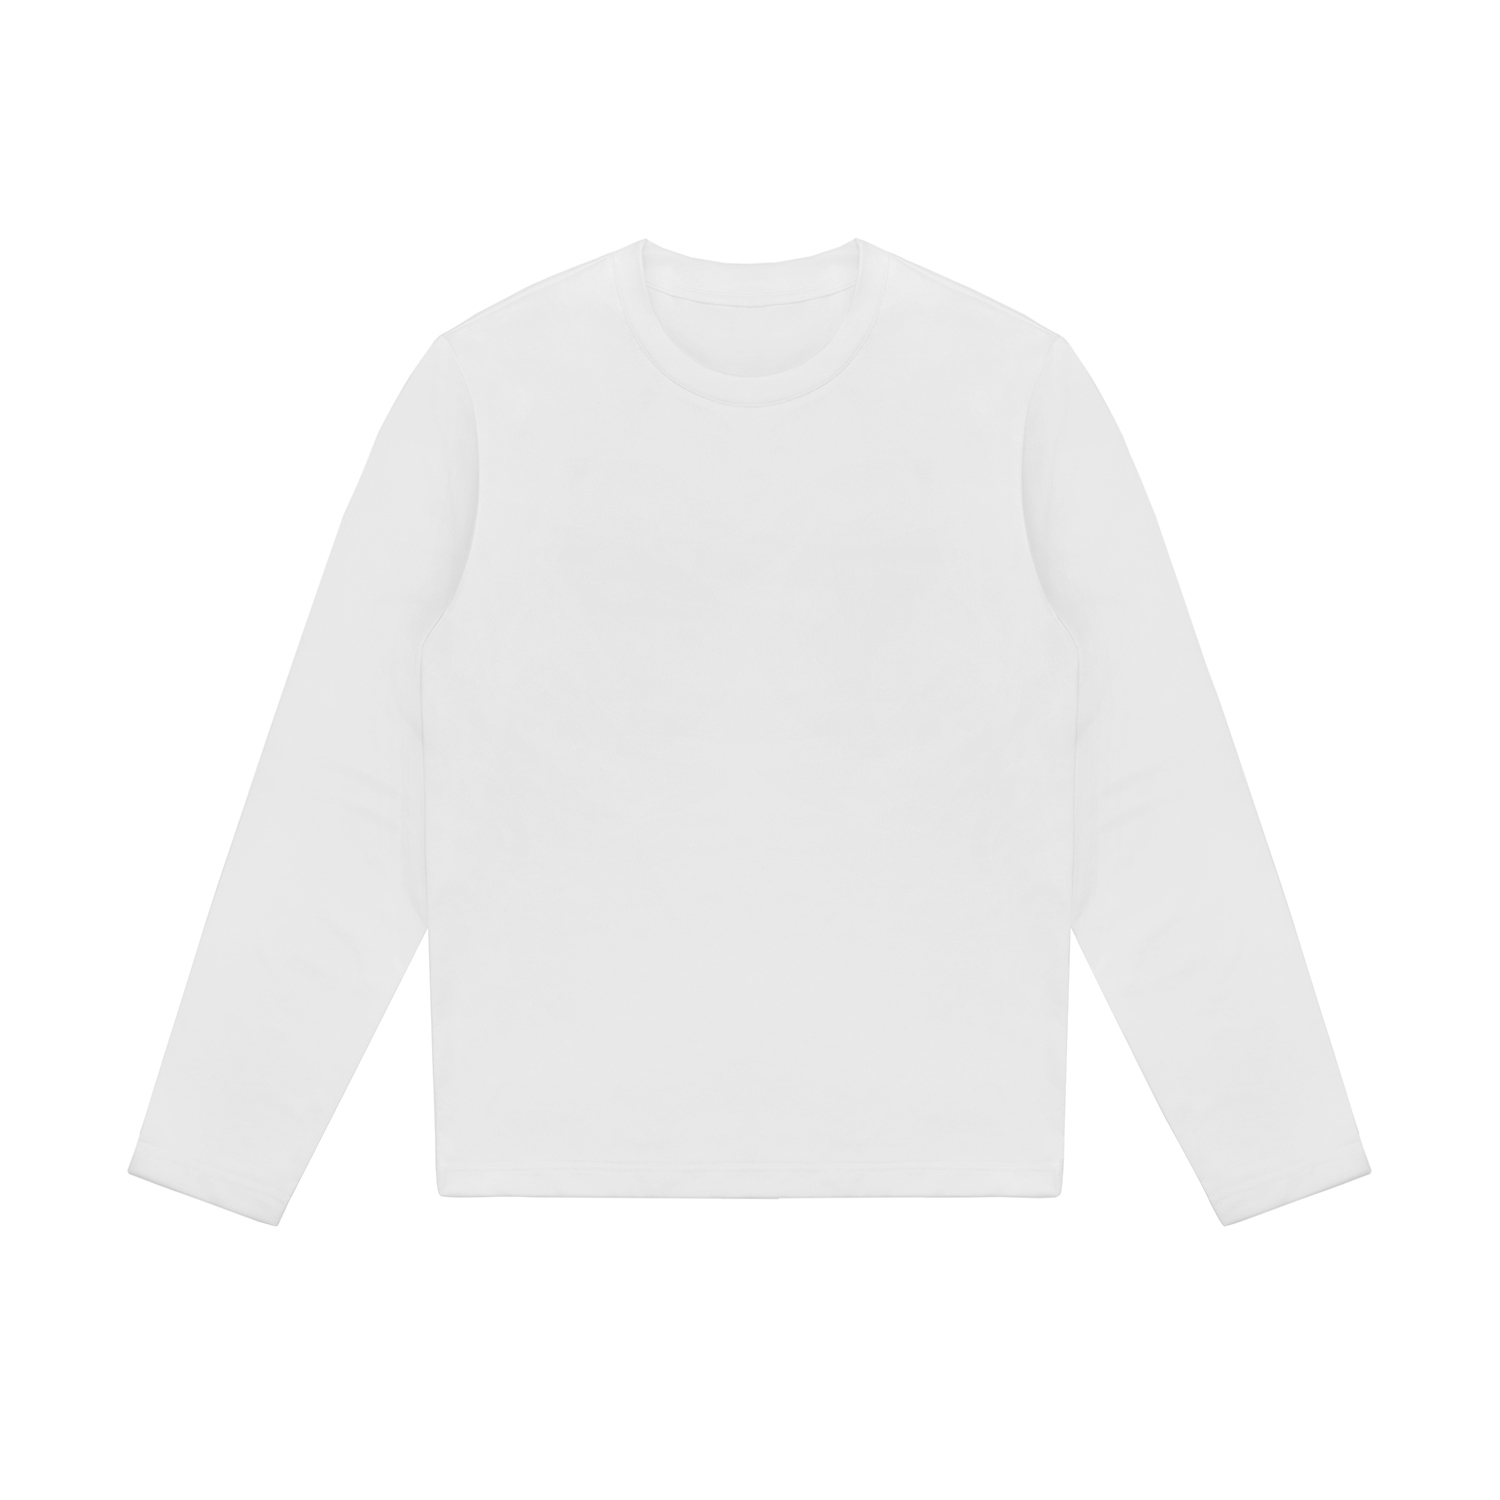 All-Over Print Unisex Quick Dry Long Sleeve Tee | HugePOD-1